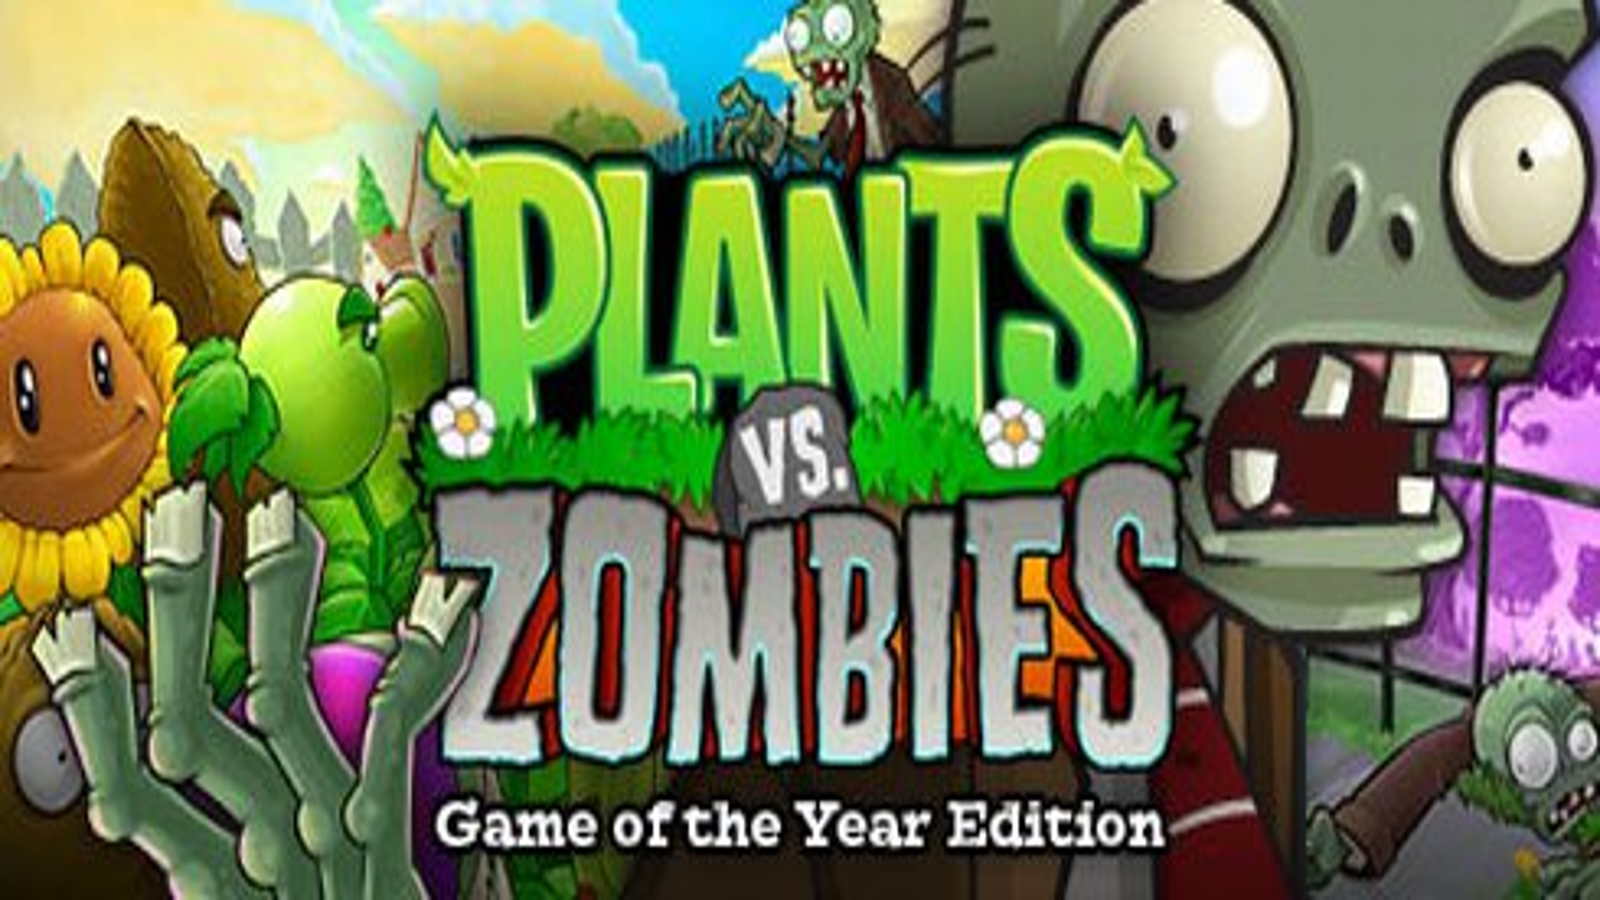 Plants vs. Zombies Game of the Year Edition is FREE on Origin